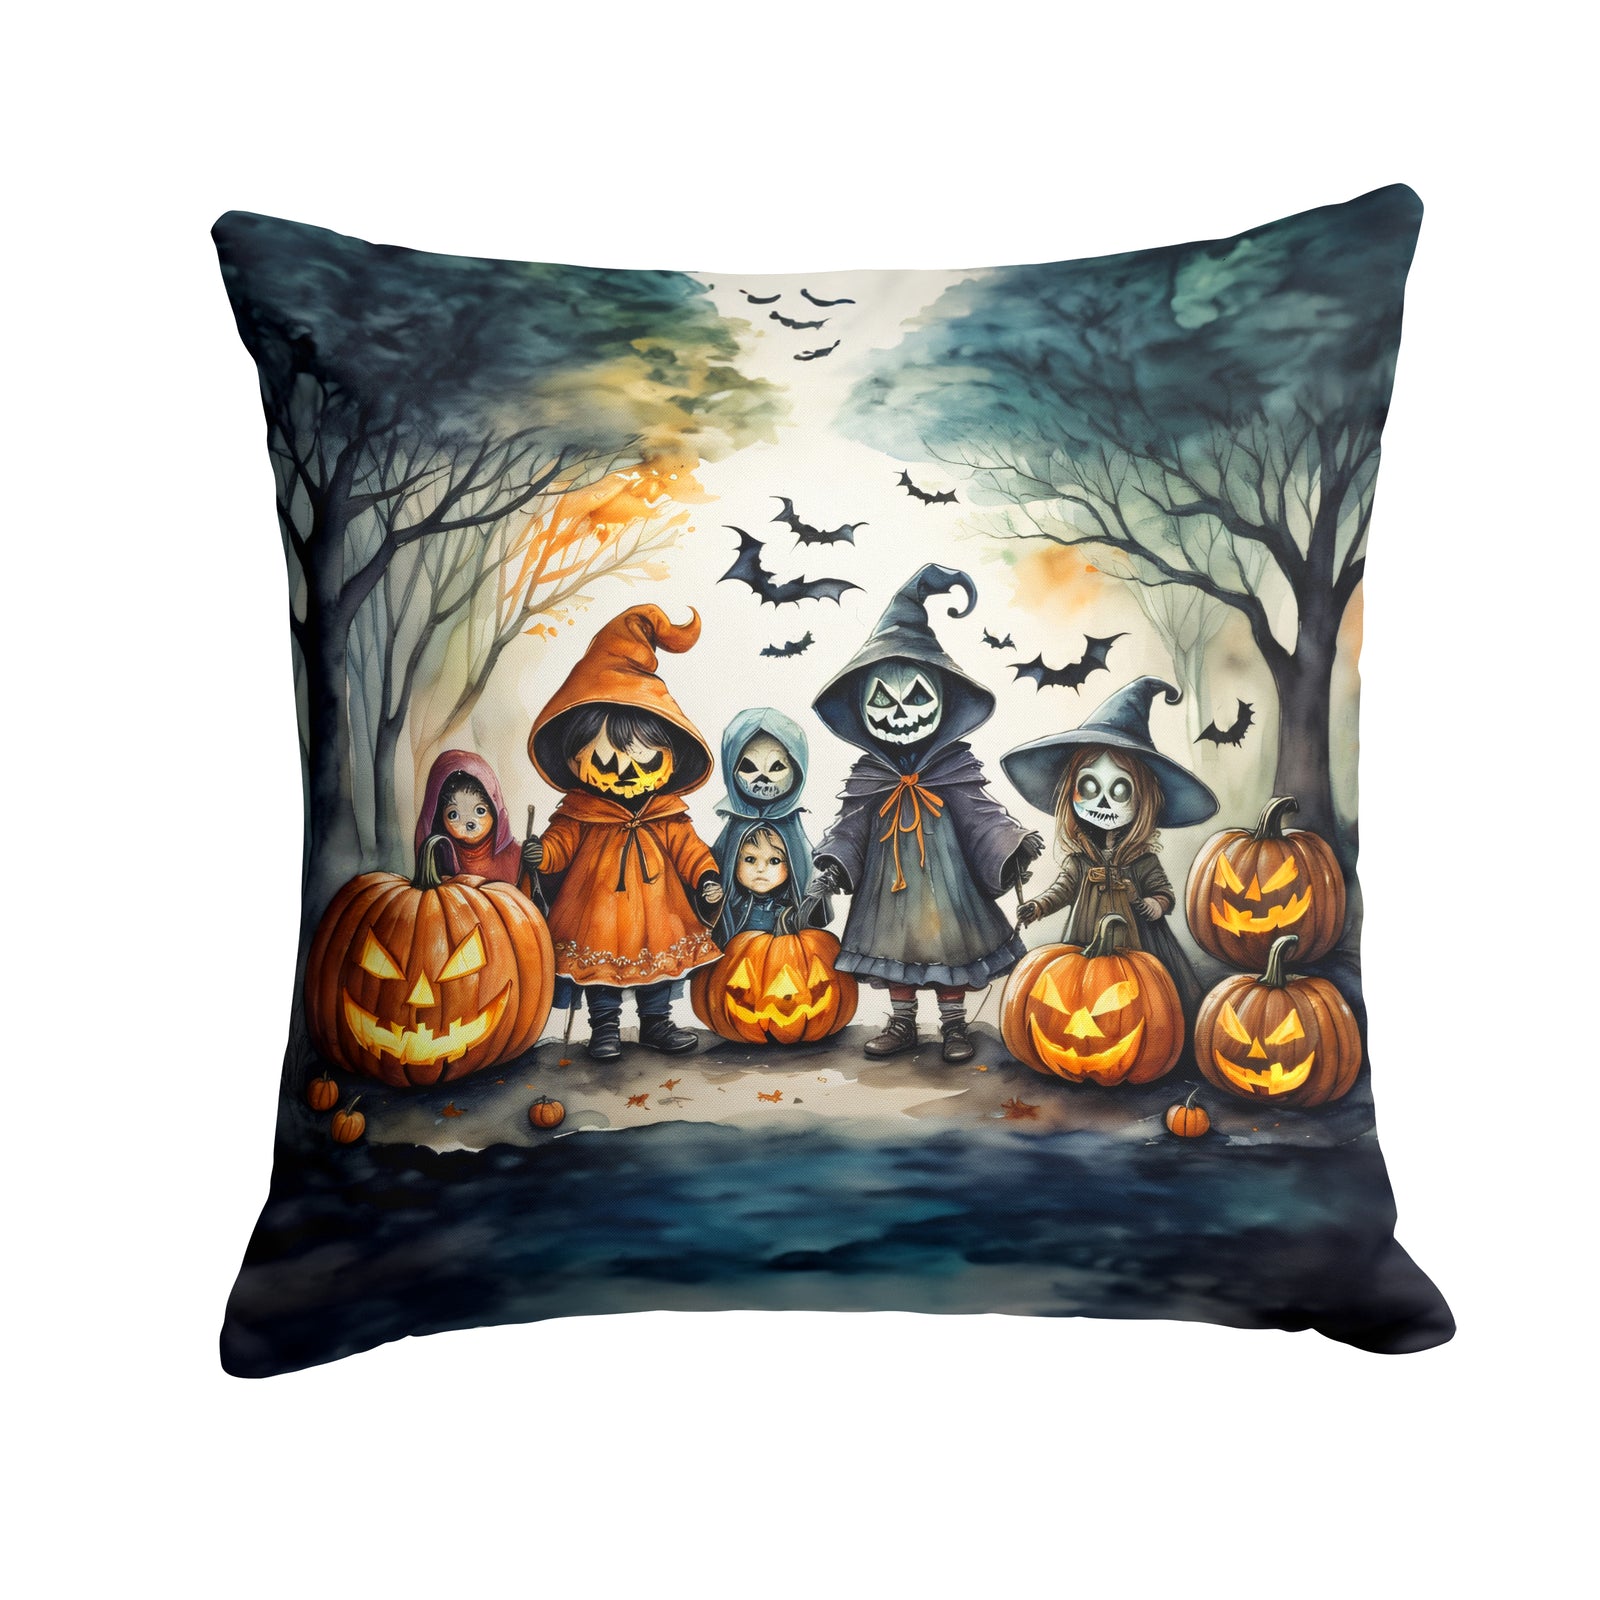 Buy this Trick or Treaters Spooky Halloween Fabric Decorative Pillow